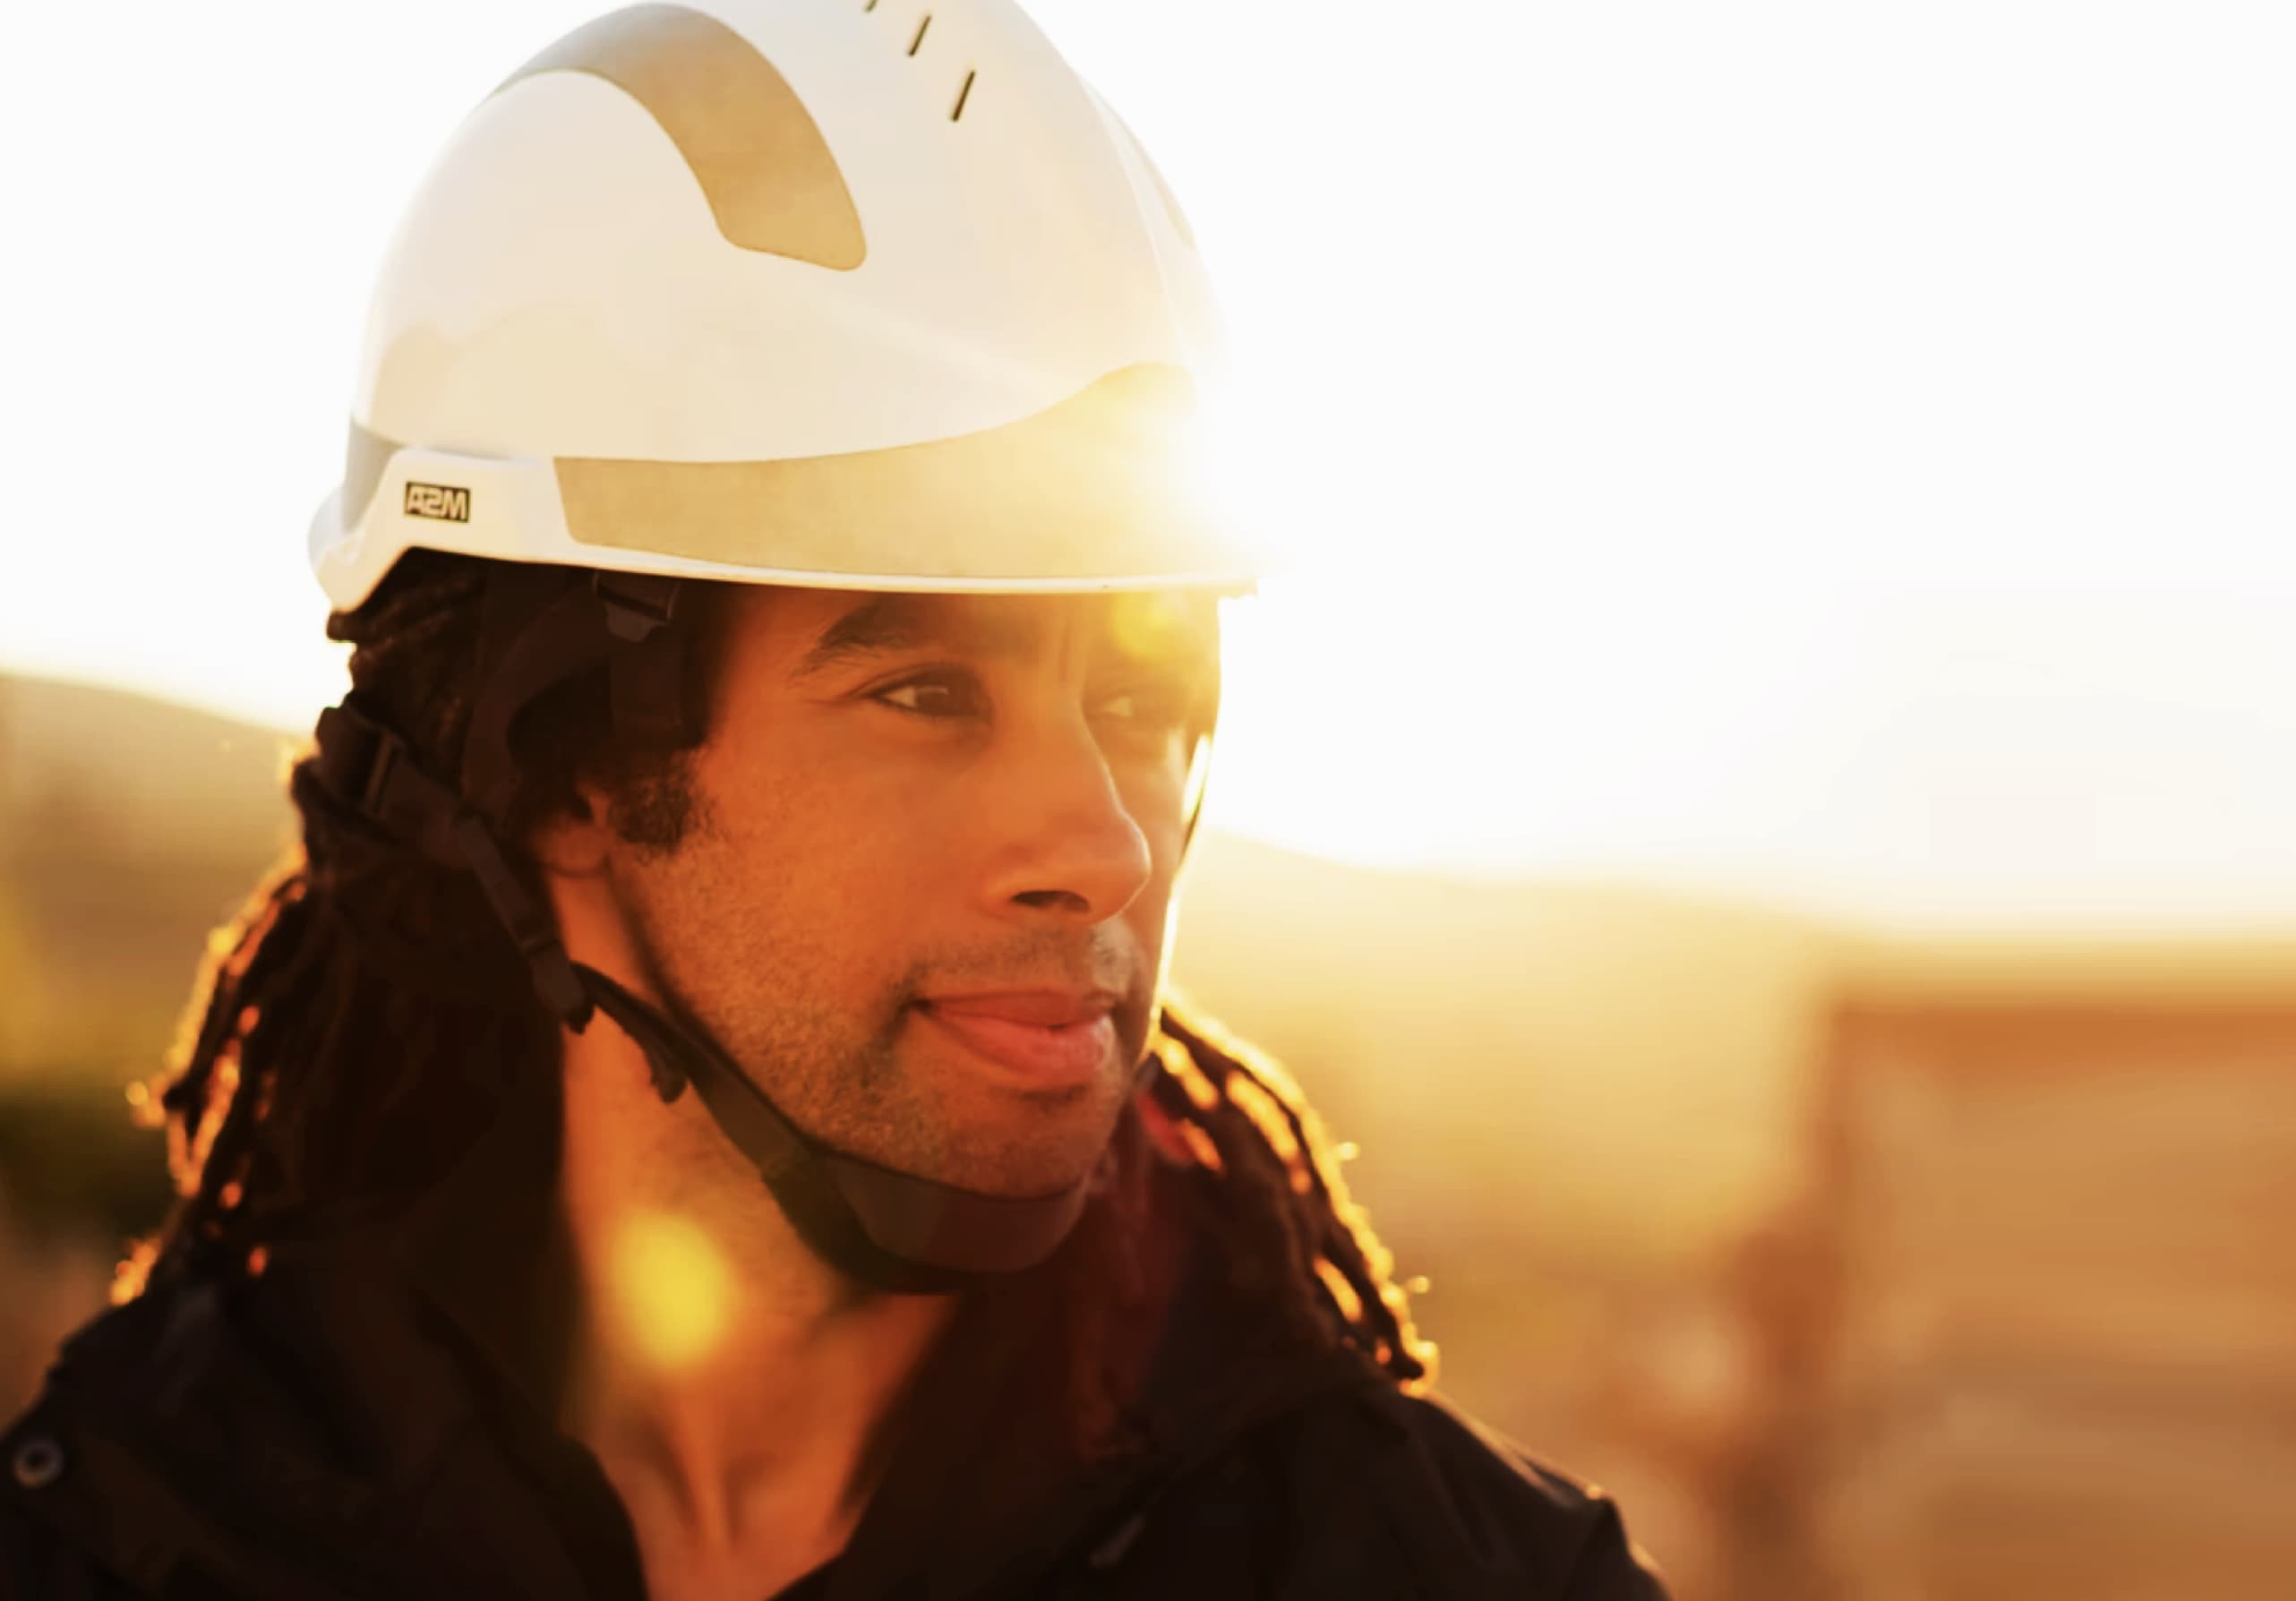 Headshot of person wearing a hardhat.